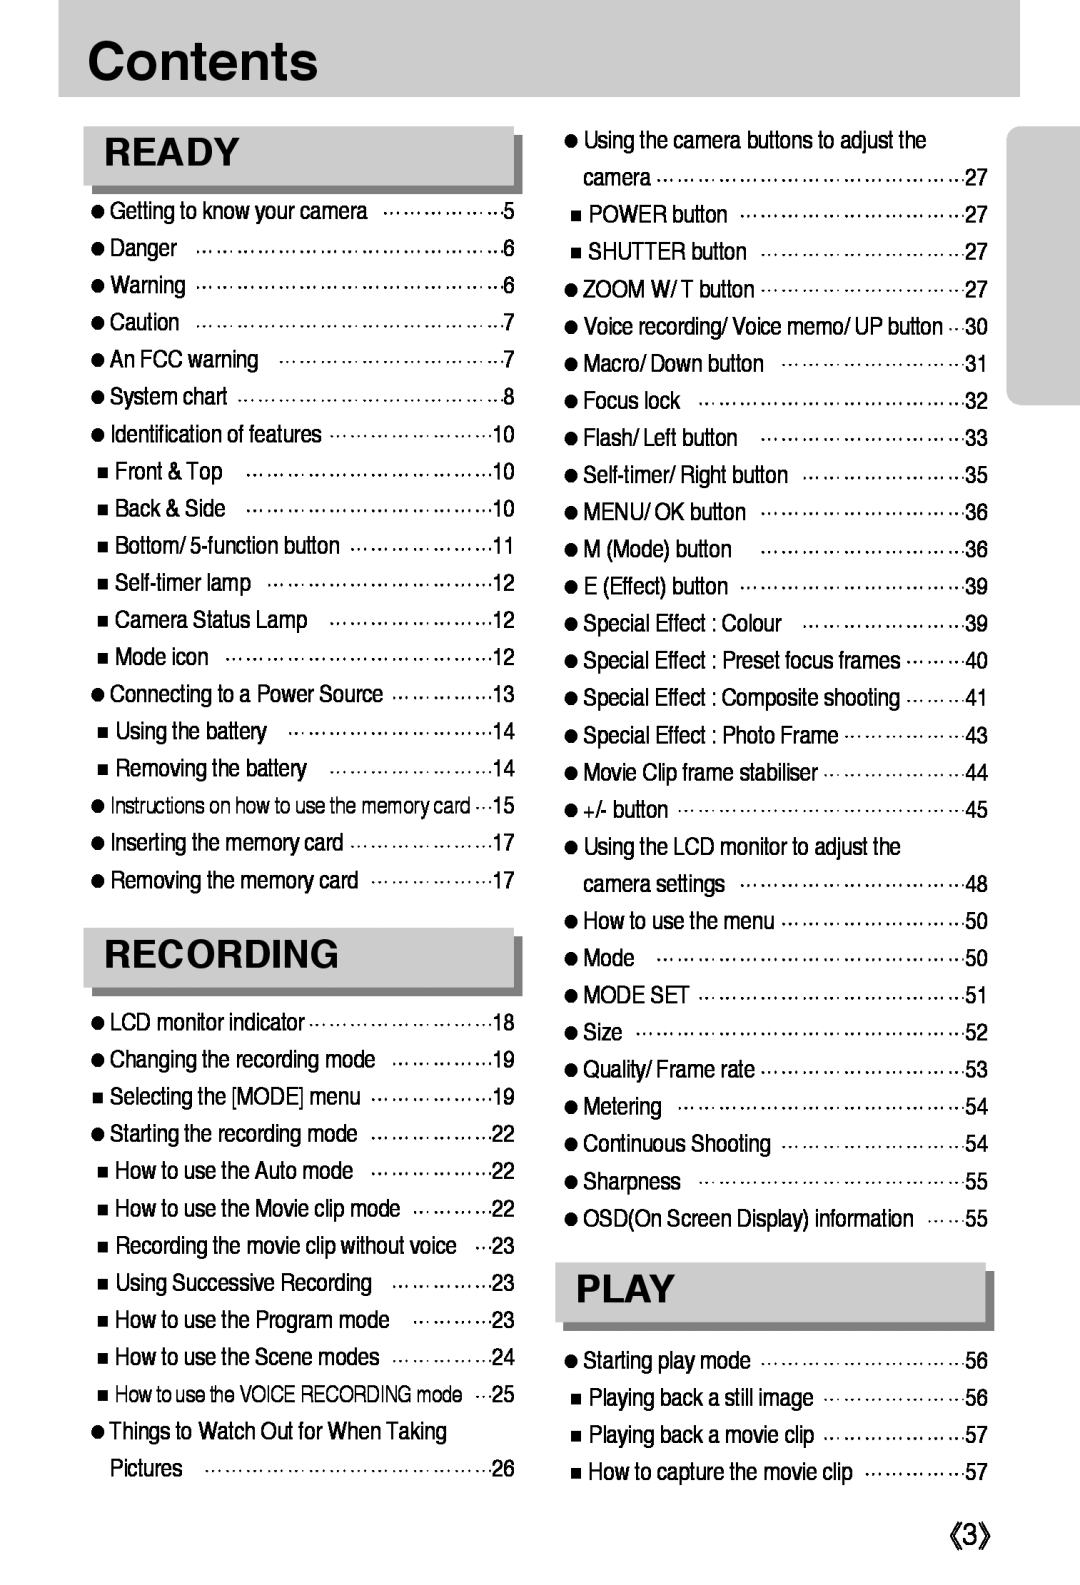 Samsung L50 user manual Contents, Ready, Recording, Play 